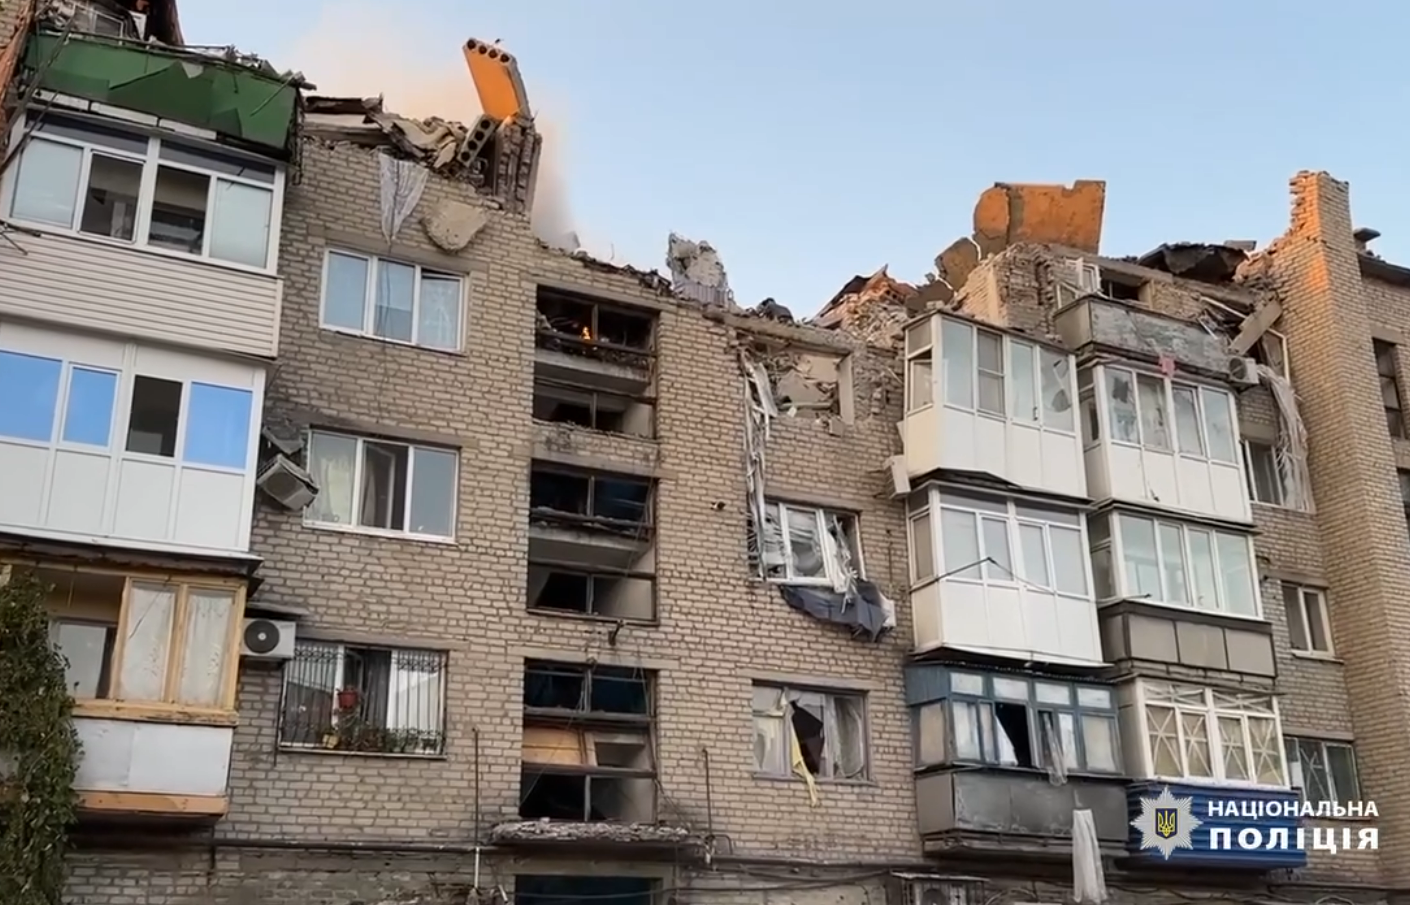 People were pulled out from under the rubble: the police showed footage of the first minutes of the rescue operation in Pokrovsk after the strike RF